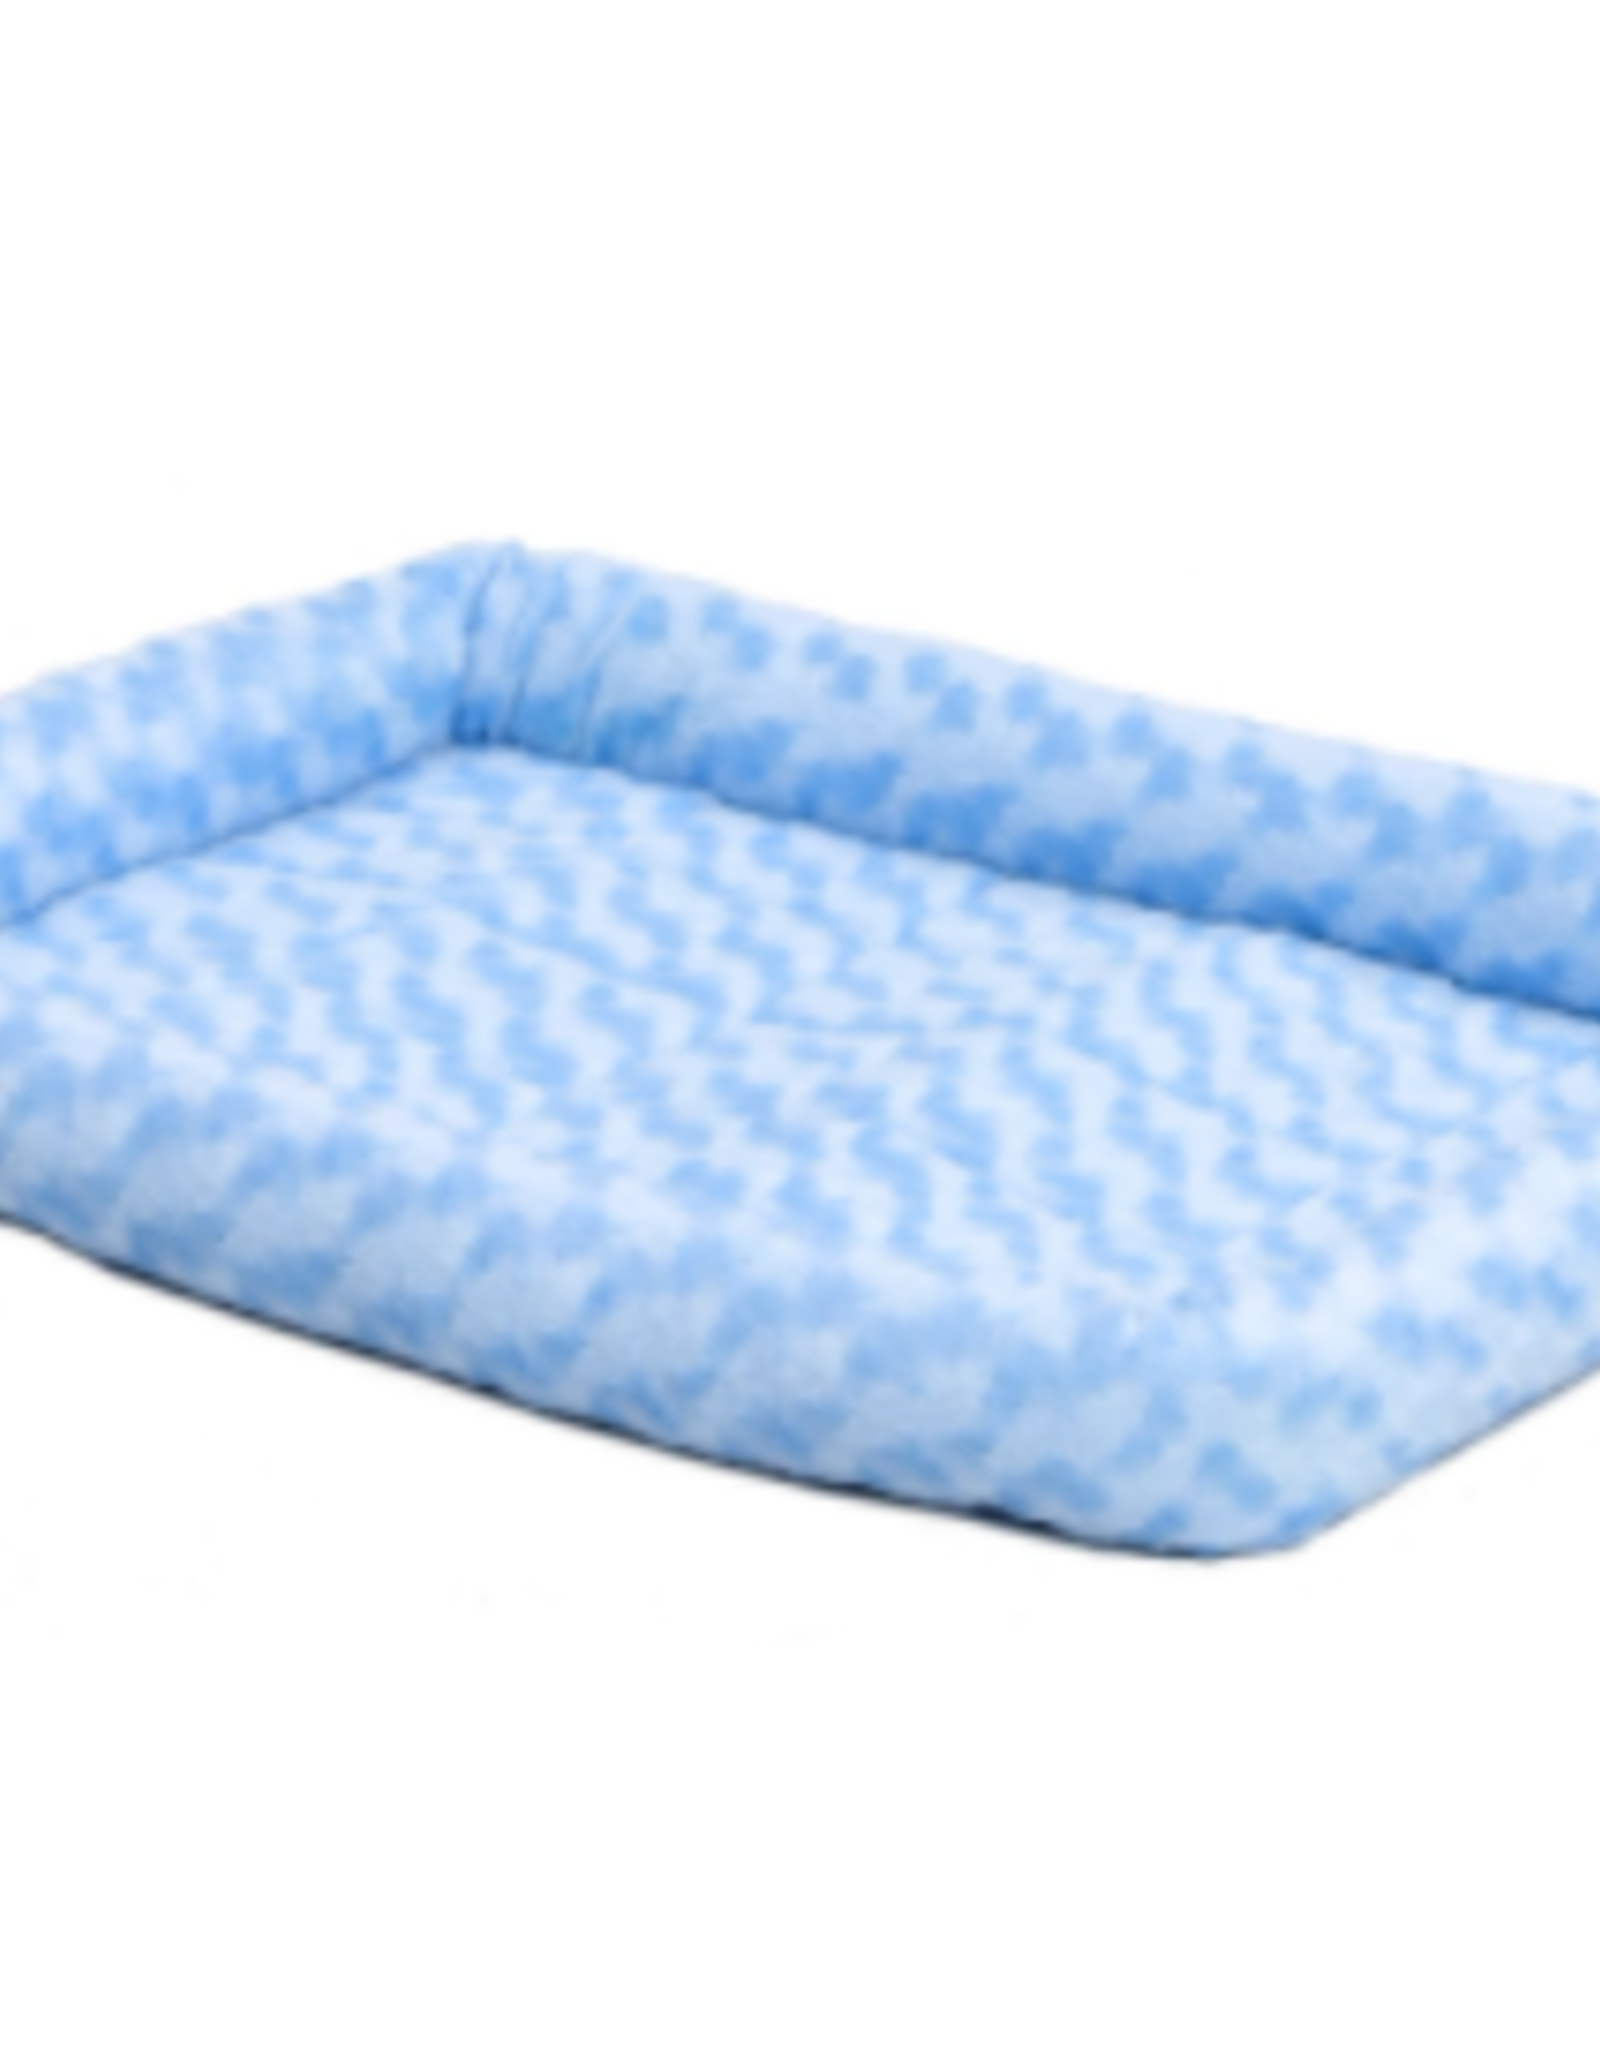 MIDWEST PET PRODUCTS QUIET TIME FASHION BED BLUE 24X18